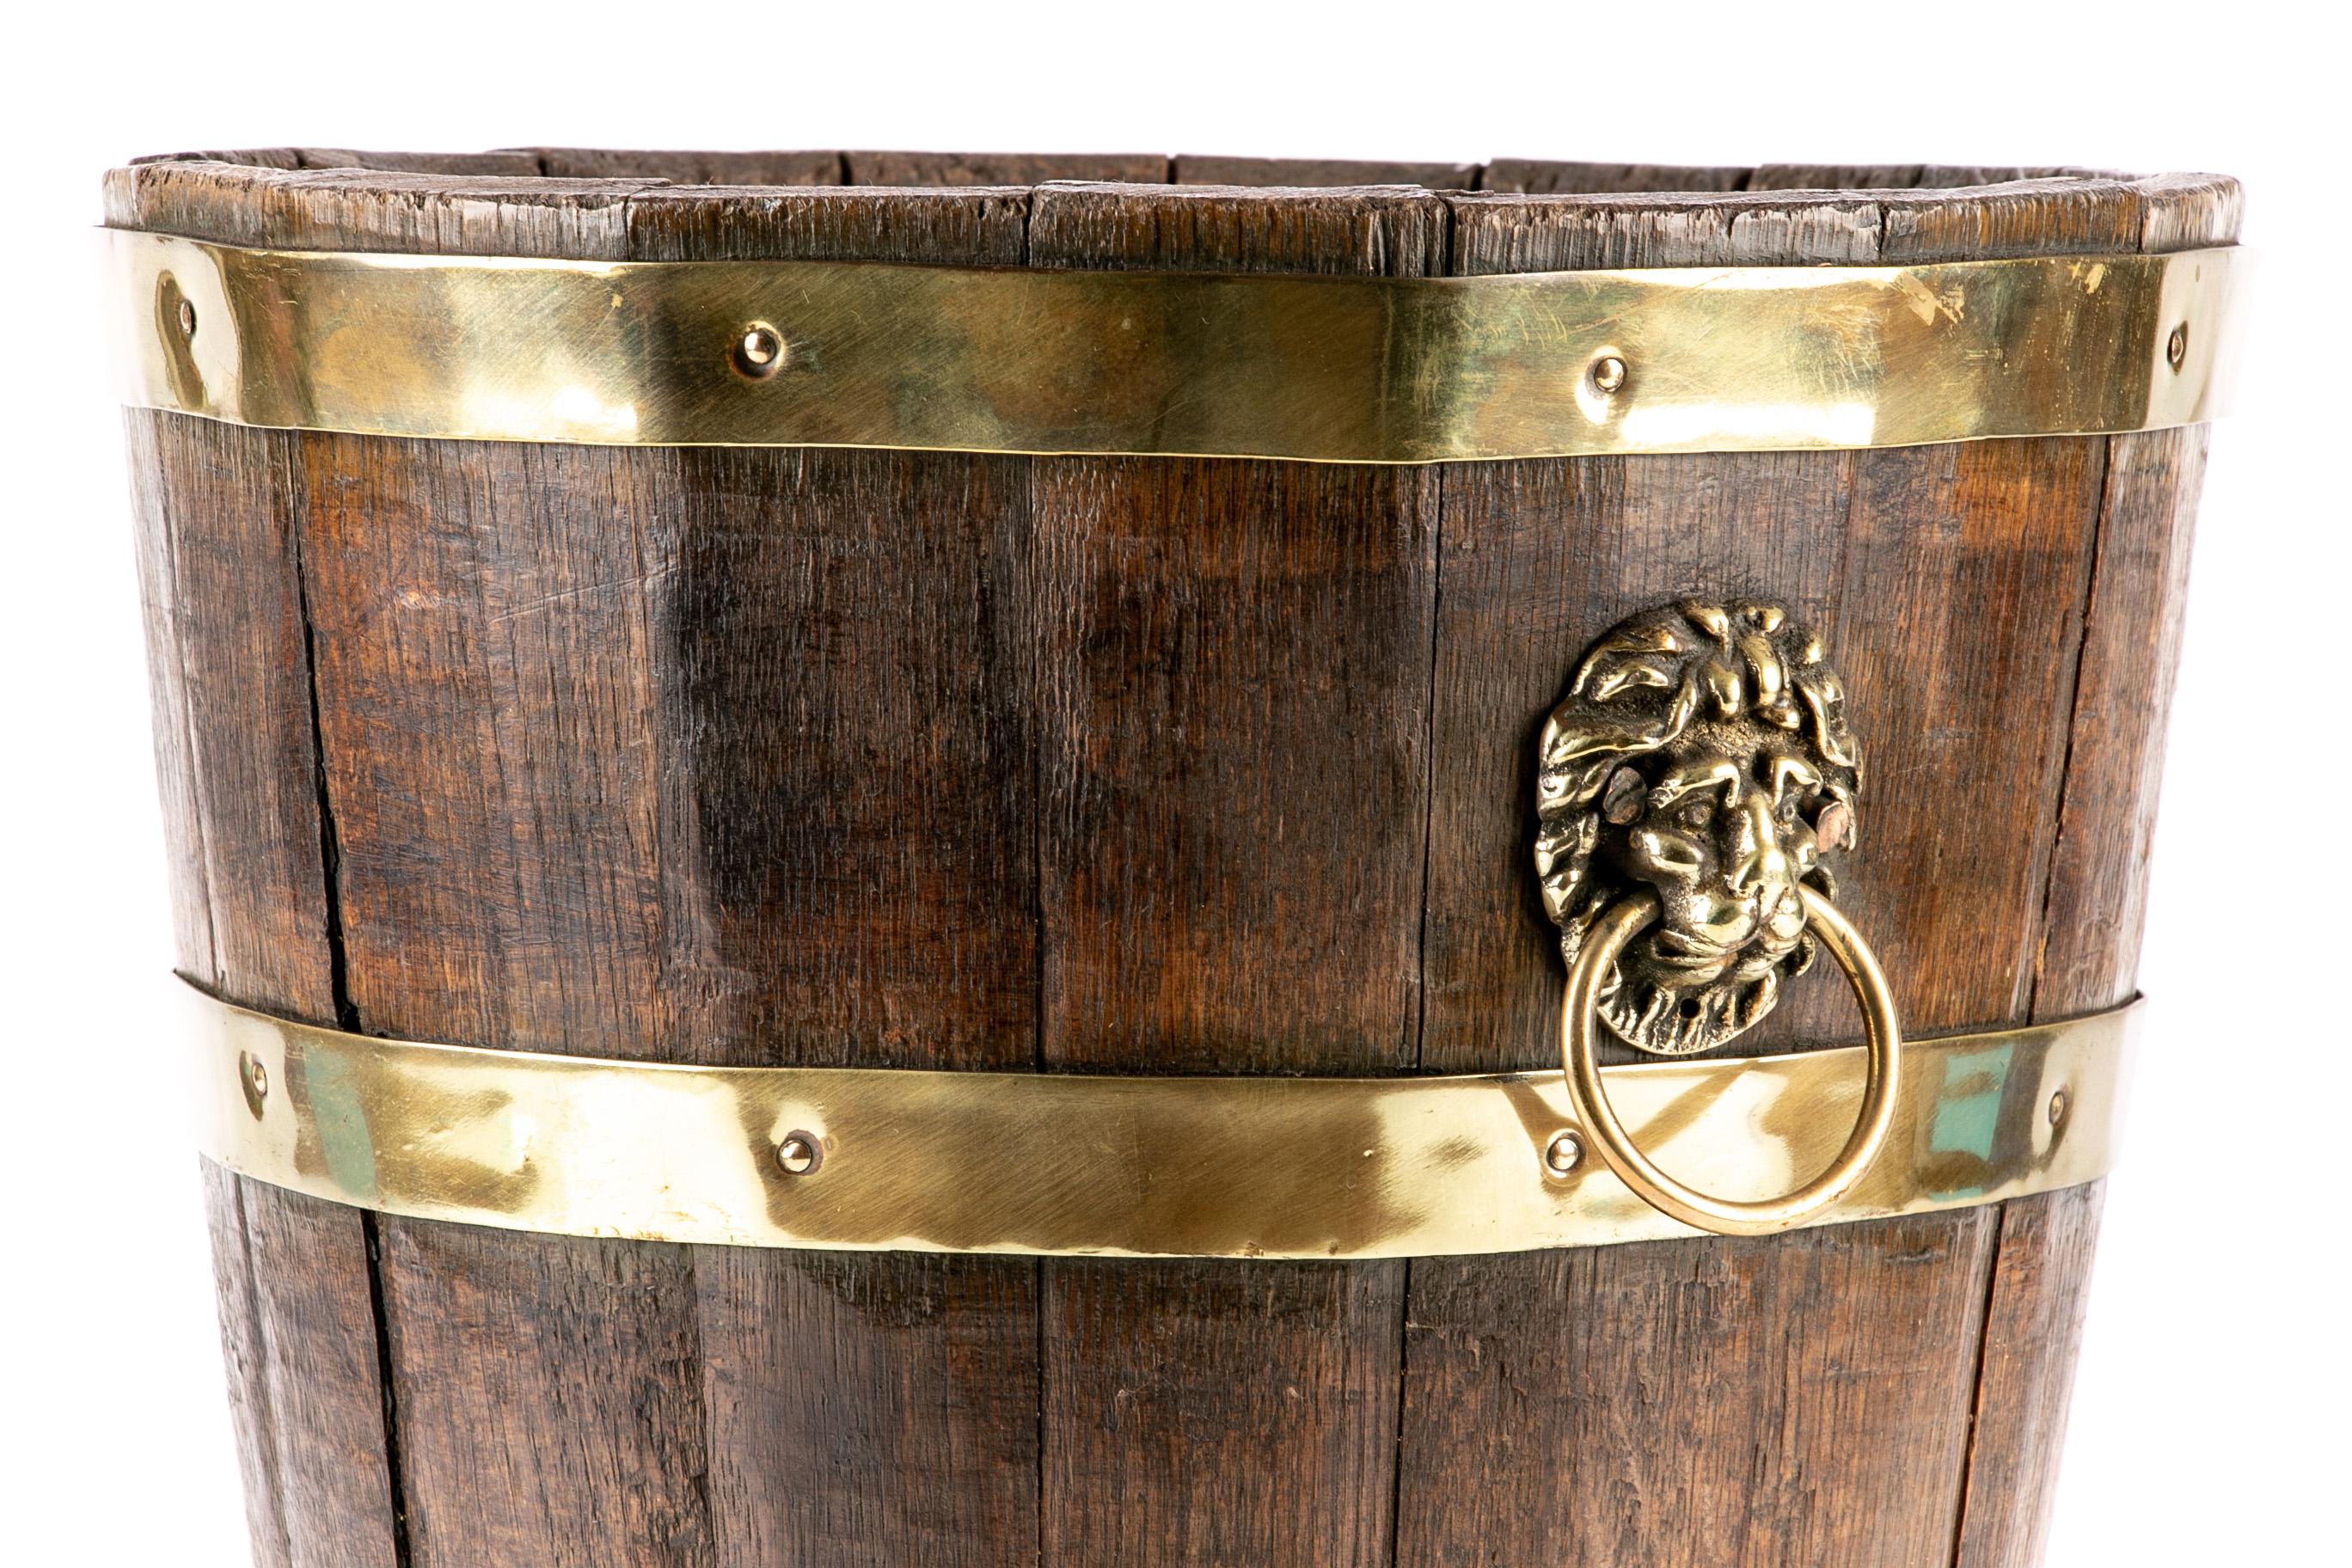 Early 19th century English Regency wine bucket. Oak with brass banding and accents, circa 1810-1820. A tapering bucket constructed out of vertical oak panels banded together with four copper bands. Raised on figural brass paw feet. The body with